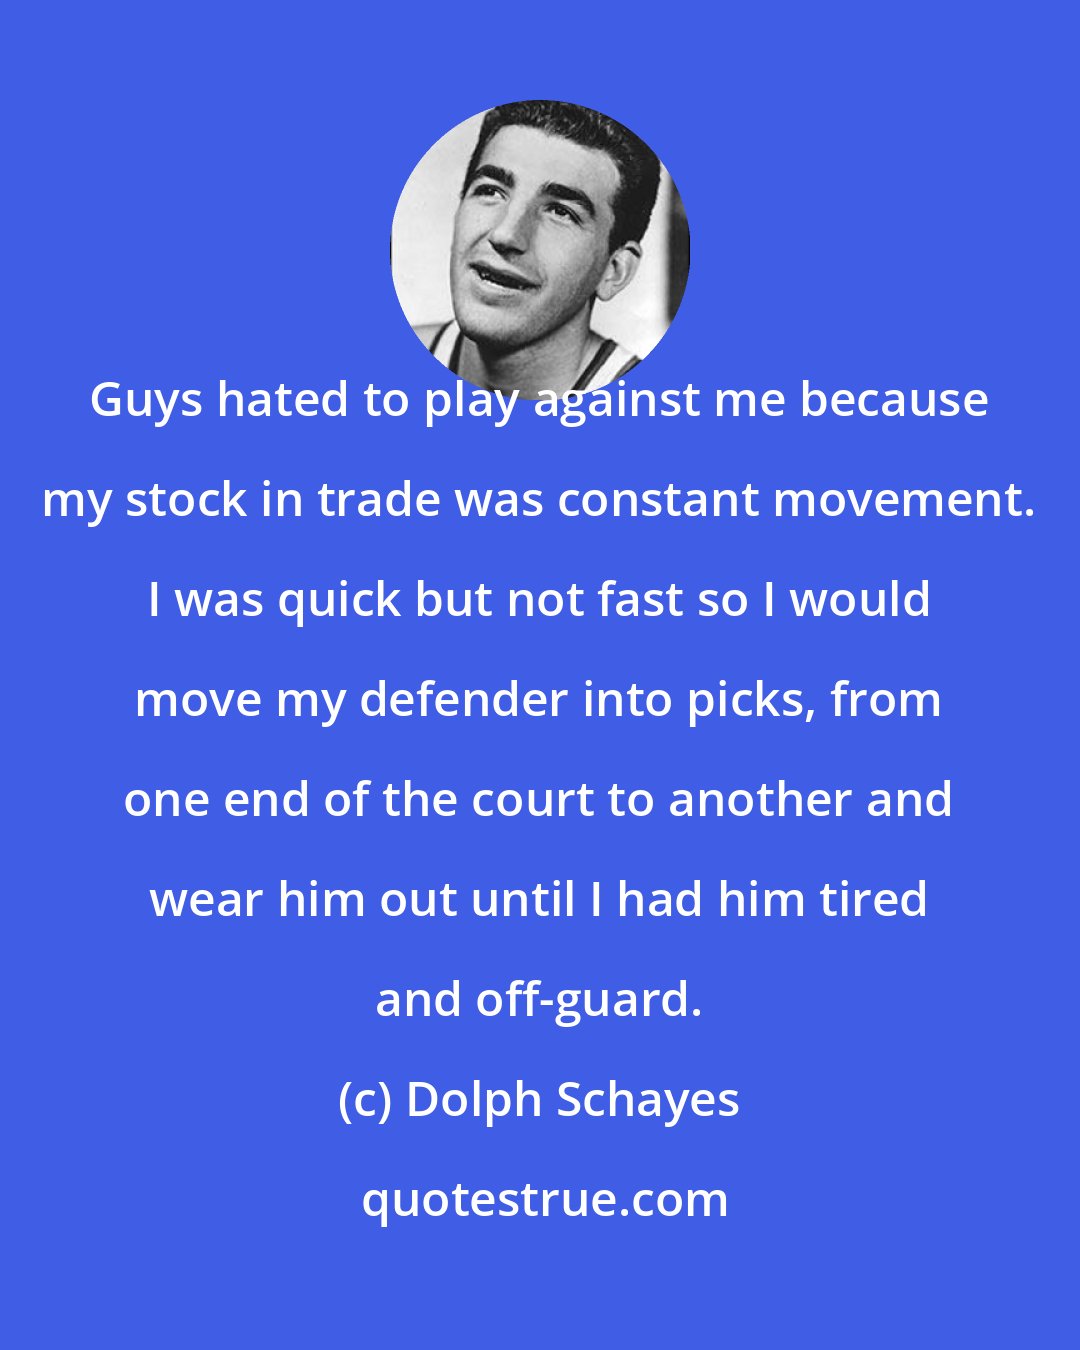 Dolph Schayes: Guys hated to play against me because my stock in trade was constant movement. I was quick but not fast so I would move my defender into picks, from one end of the court to another and wear him out until I had him tired and off-guard.